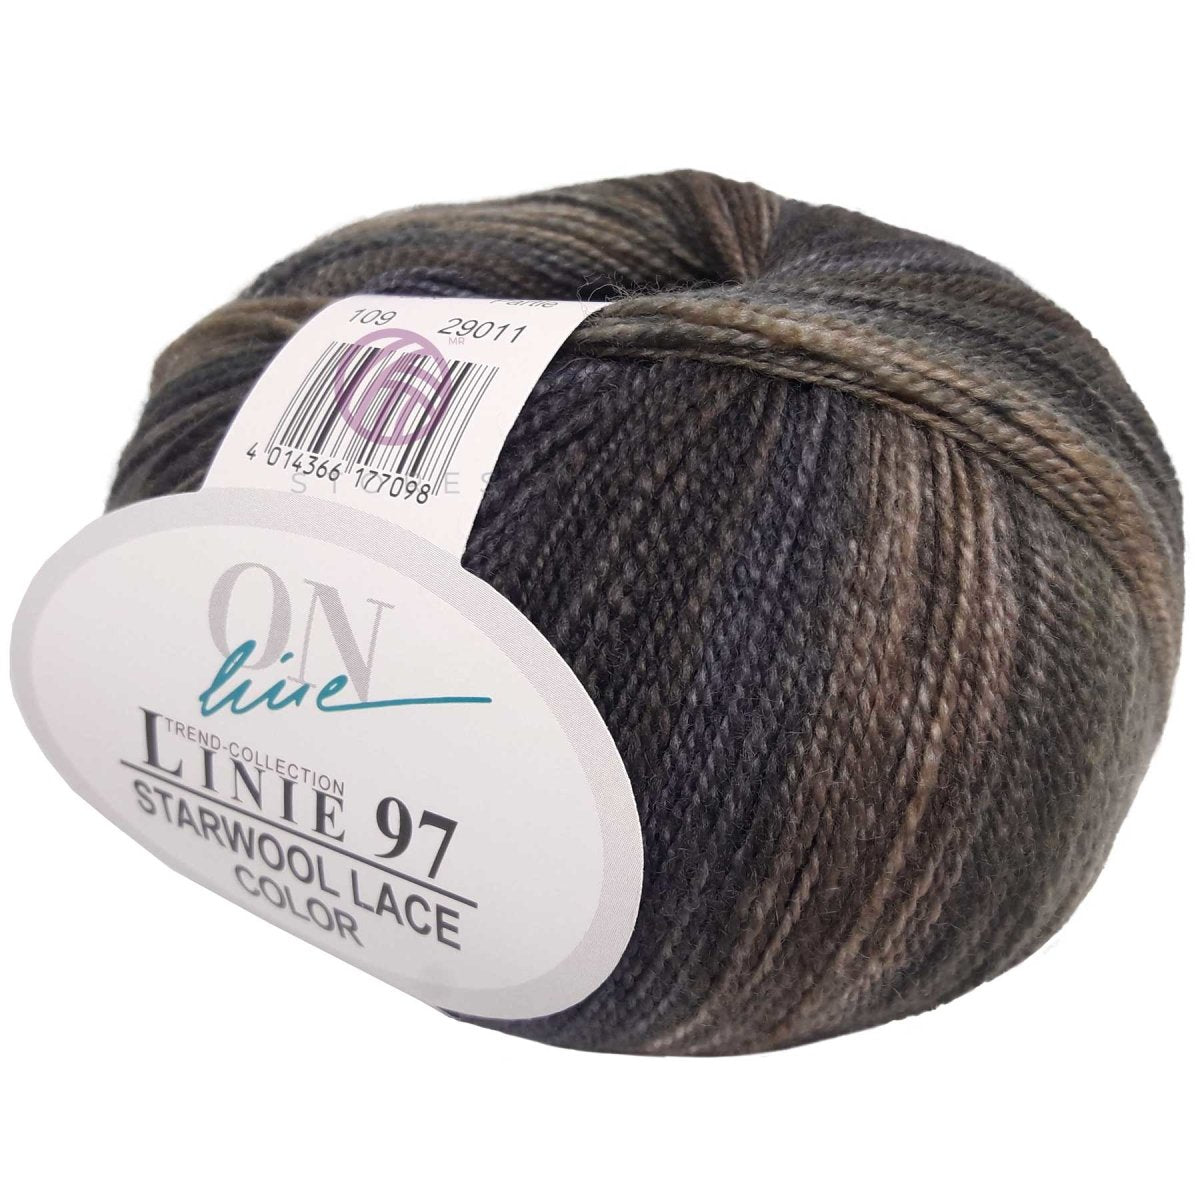 STARWOOL LACE COLOR - Crochetstores110097-1094014366177098